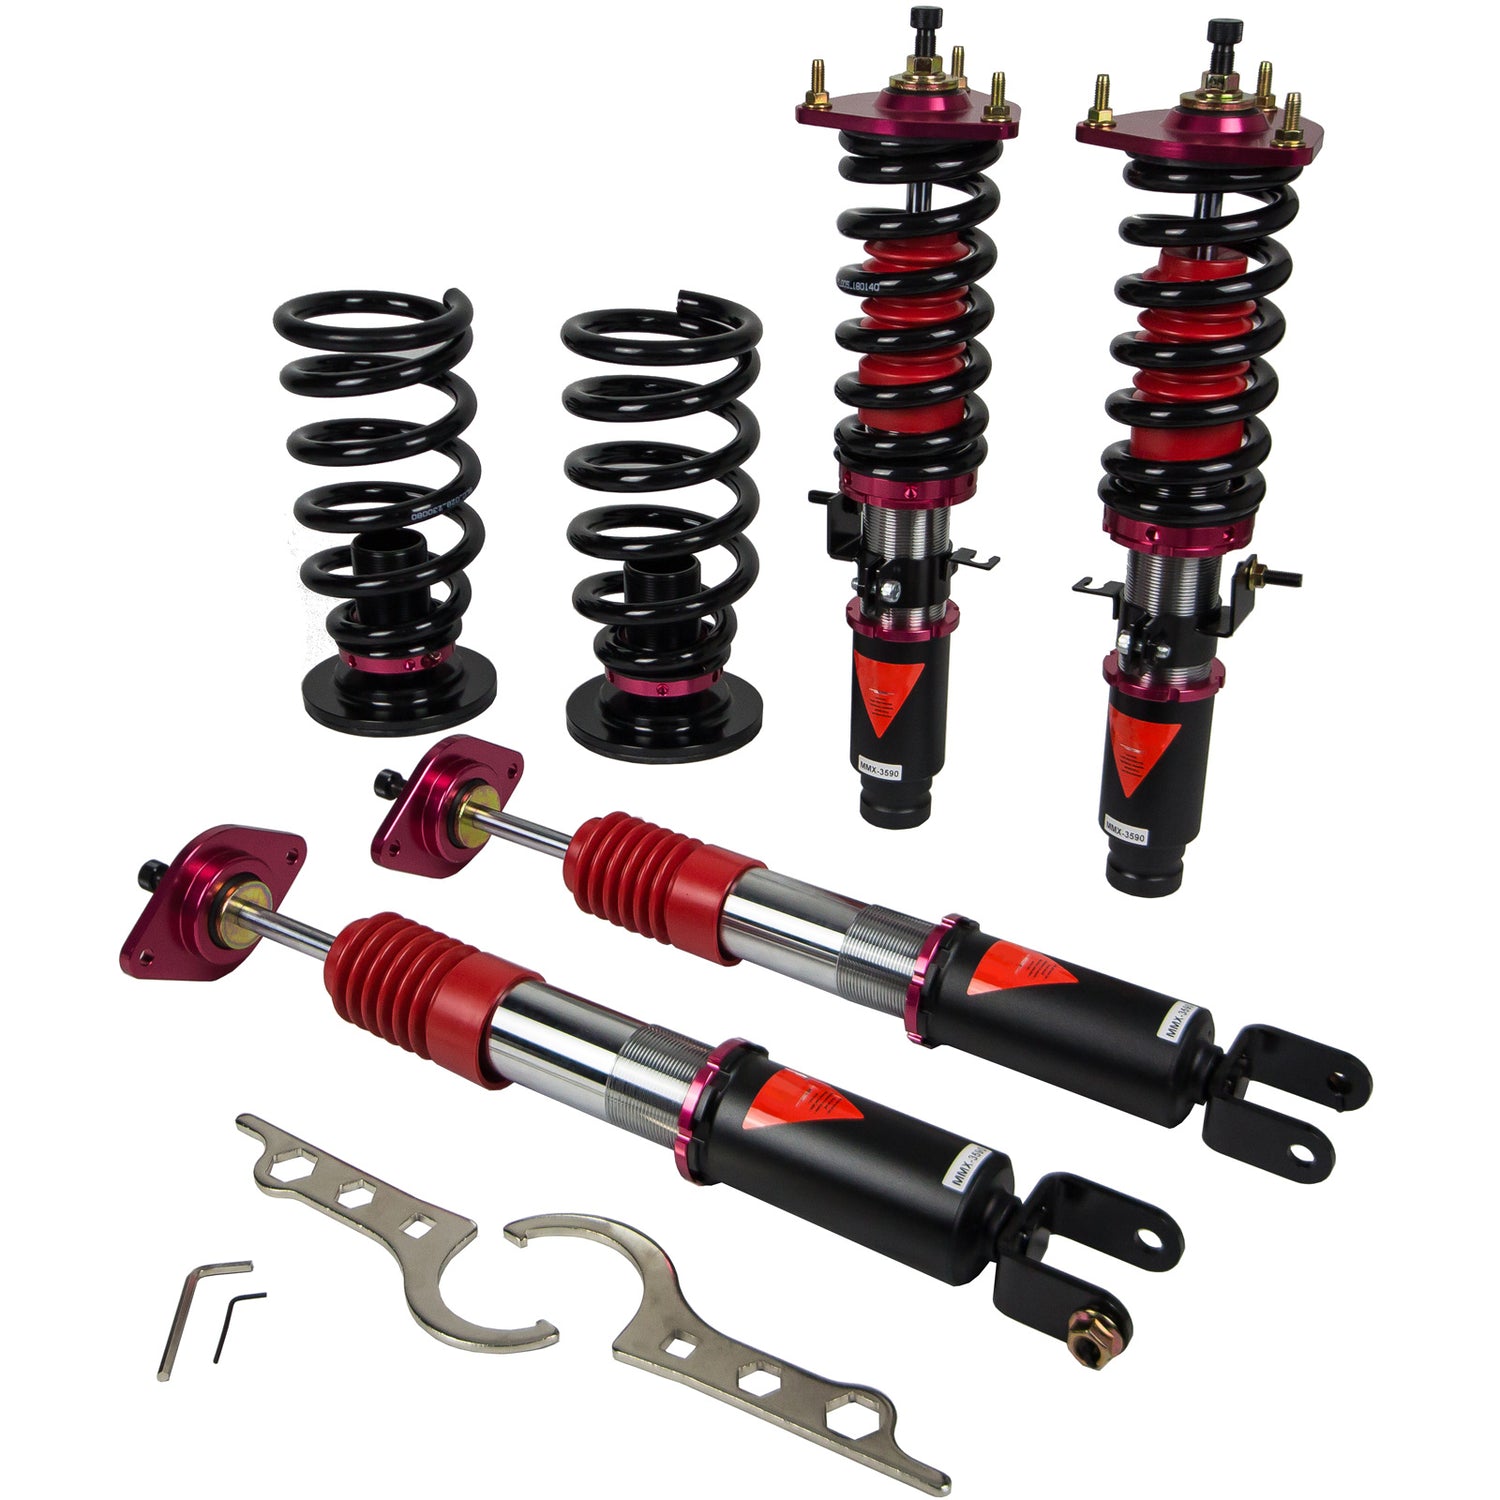 MMX3590 MAXX Coilovers Lowering Kit, Fully Adjustable, Ride Height, 40 Clicks Rebound Settings, Infiniti G35X 2007-08/G37X(V36) 2009-13(AWD)